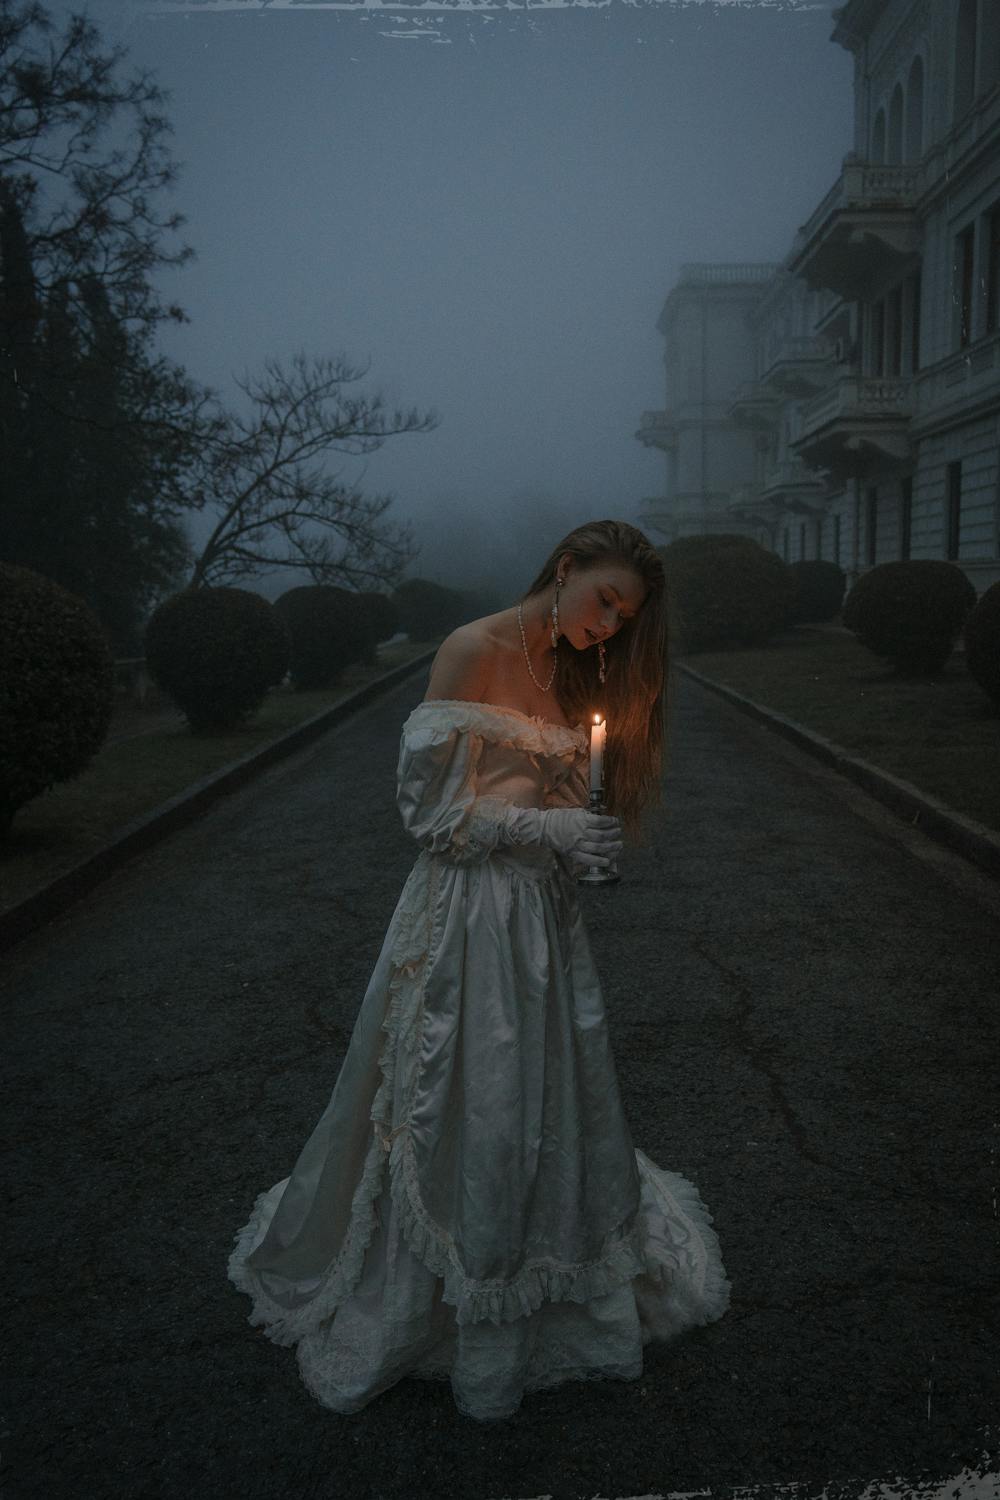 Woman in a Long Vintage Dress Holding a Lit Candle Outside in Fog ...